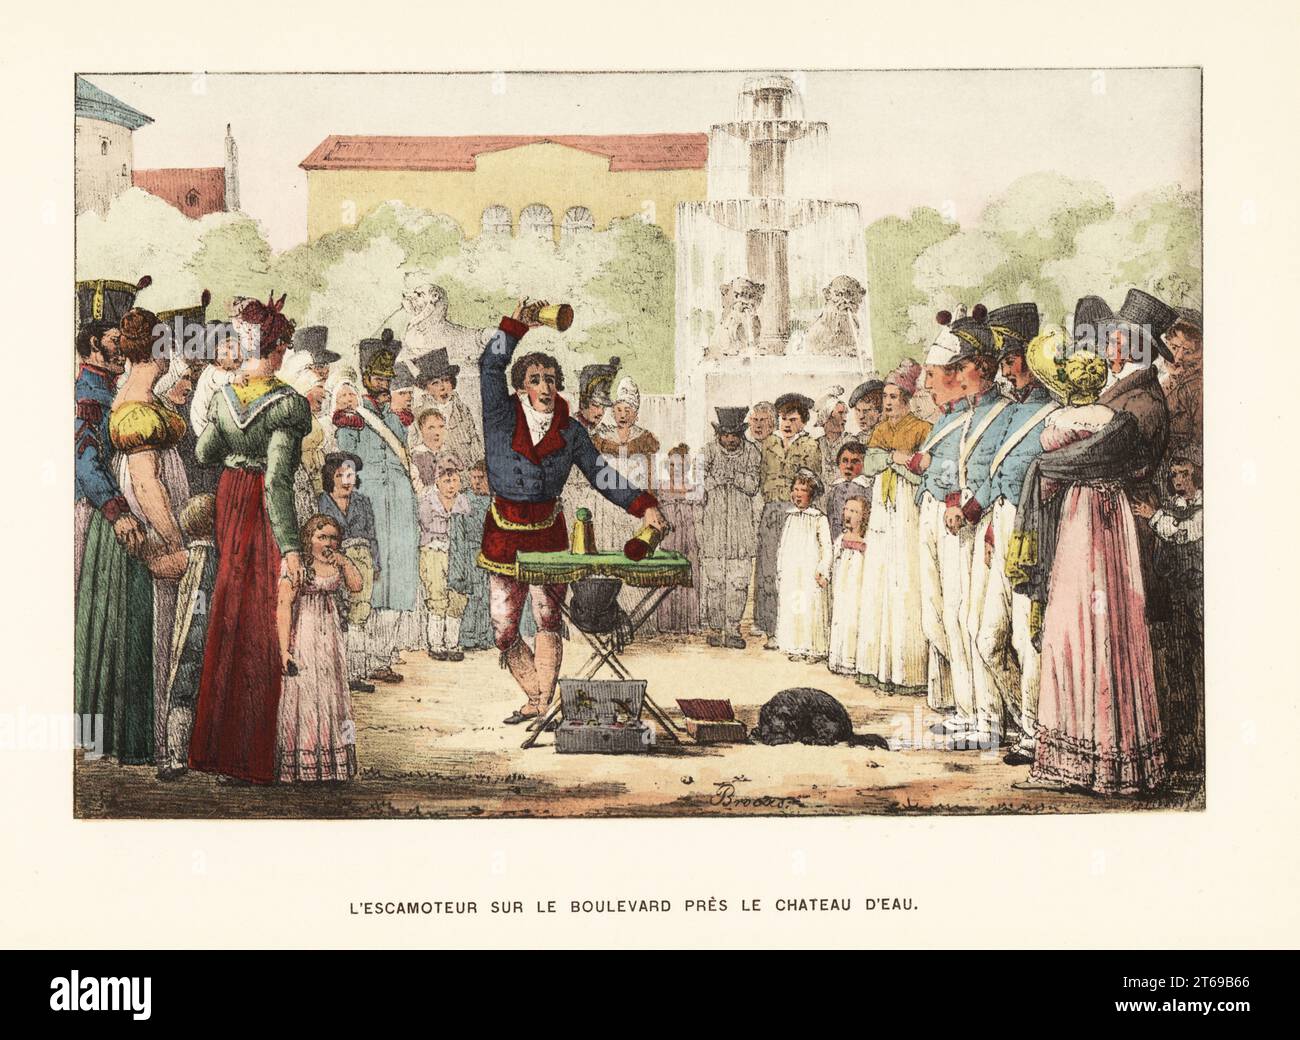 Magician at the Chateau d'Eau performing sleight of hand in front of an audience of soldiers and nurses. Cups and balls or the shell game trick. From an illustration by Victor Auver from A Tour through Paris, 1825. L'escamoteur sur le boulevard pres le Chateau d'Eau. Handcoloured lithograph from Henry Rene dAllemagnes Recreations et Passe-Temps, Games and Pastimes, Hachette, Paris, 1906. Stock Photo